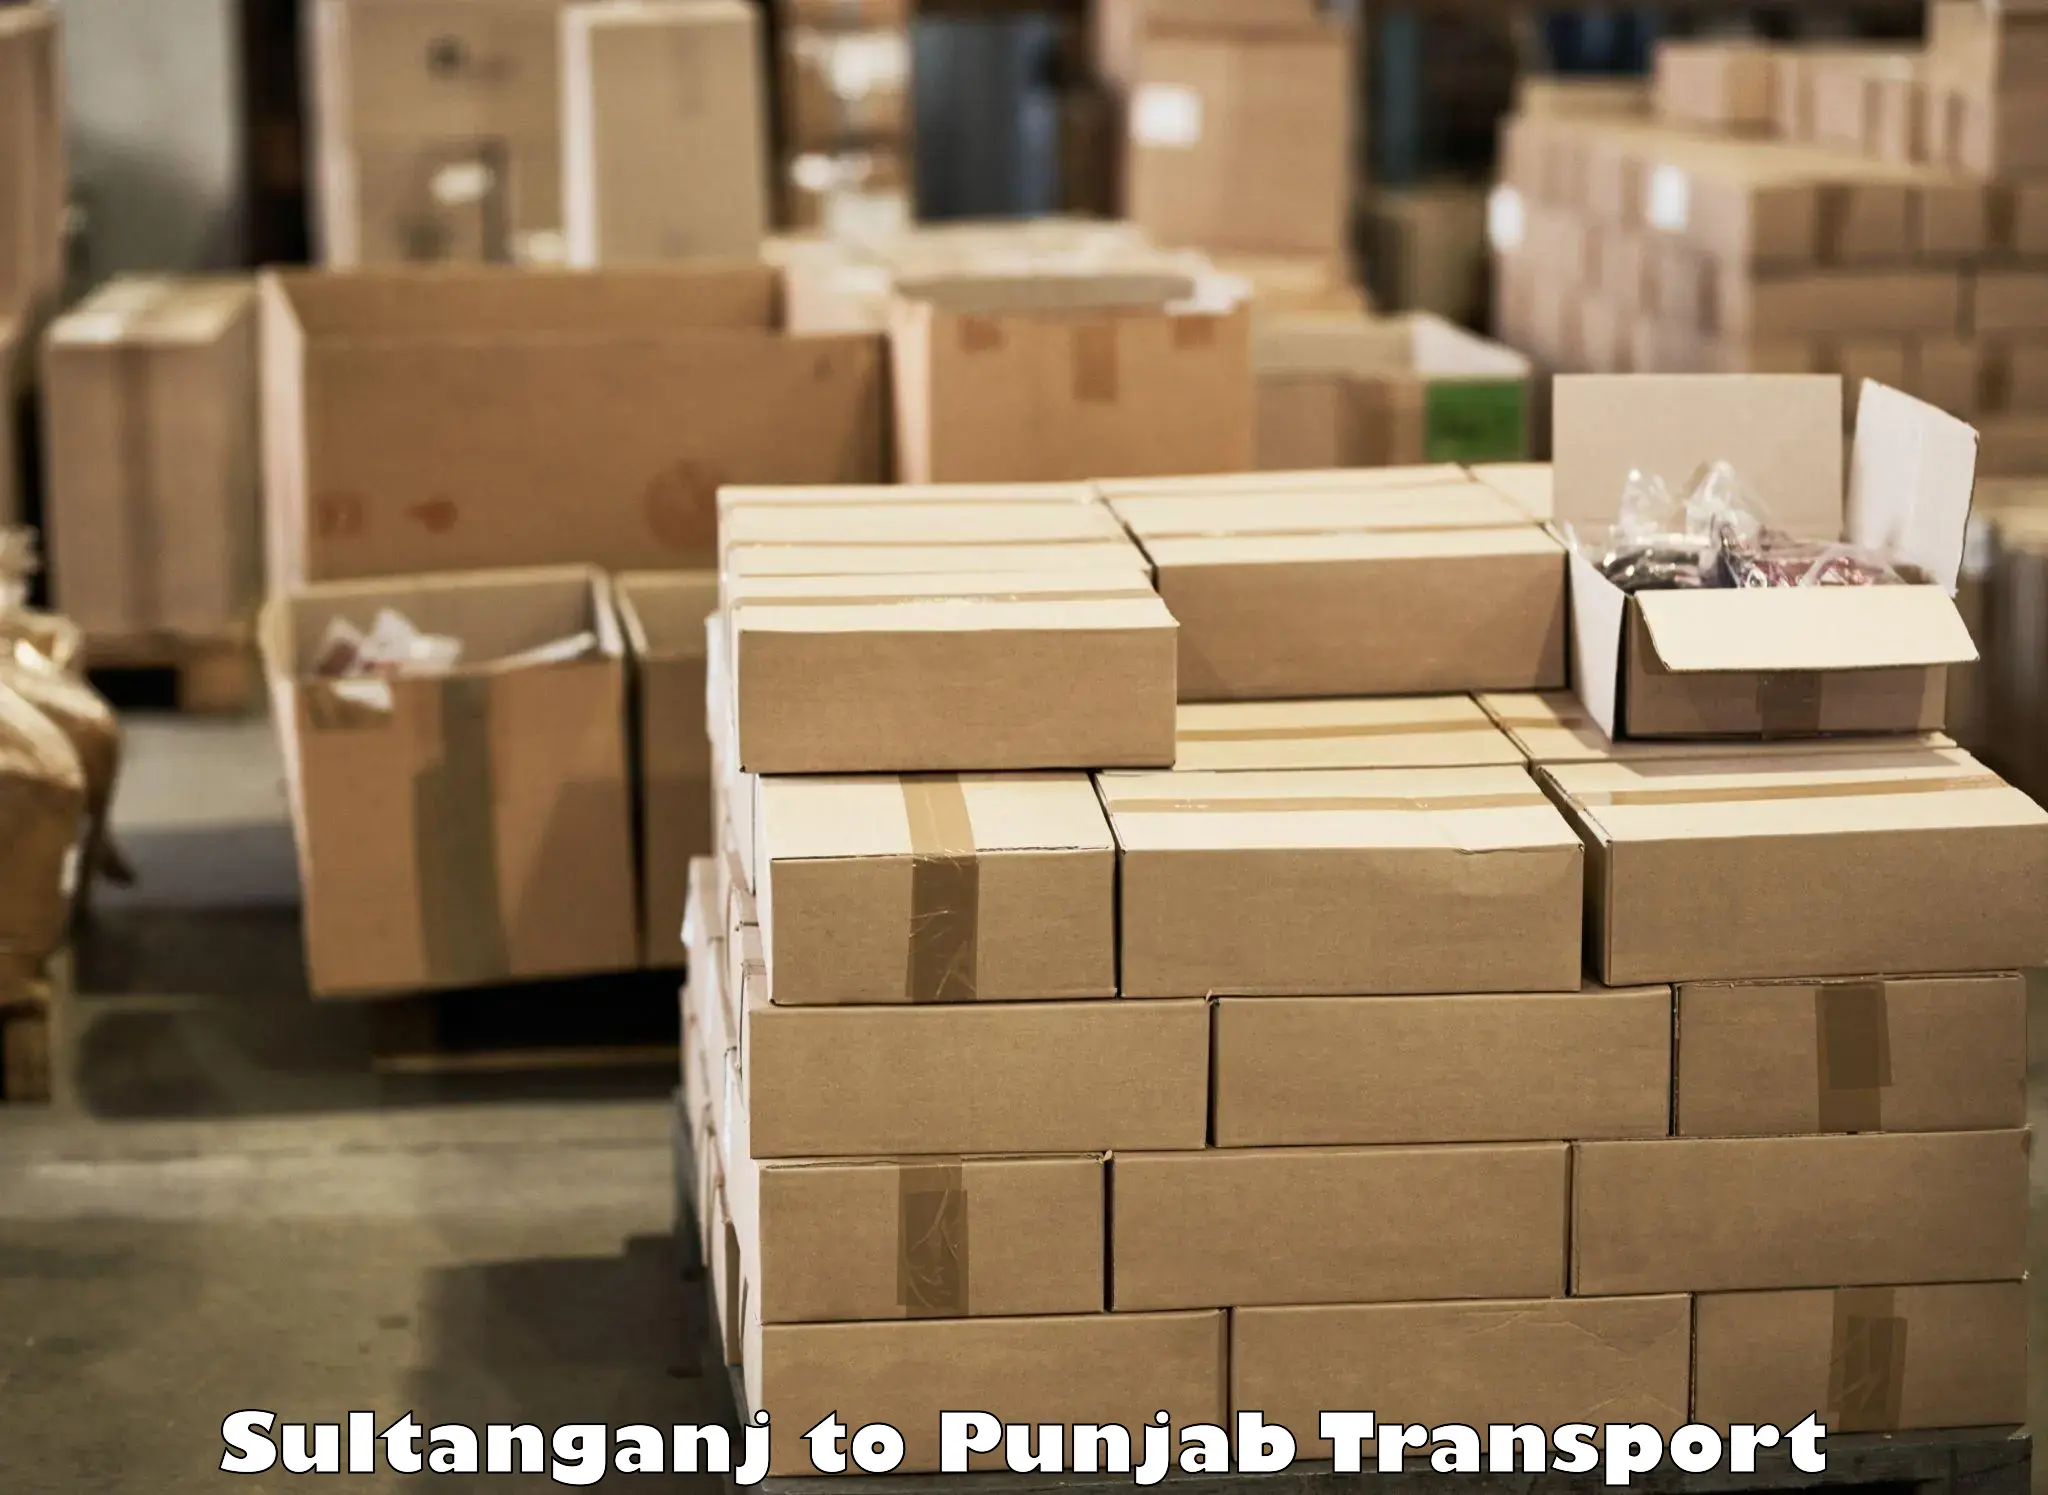 Daily transport service Sultanganj to Jalalabad